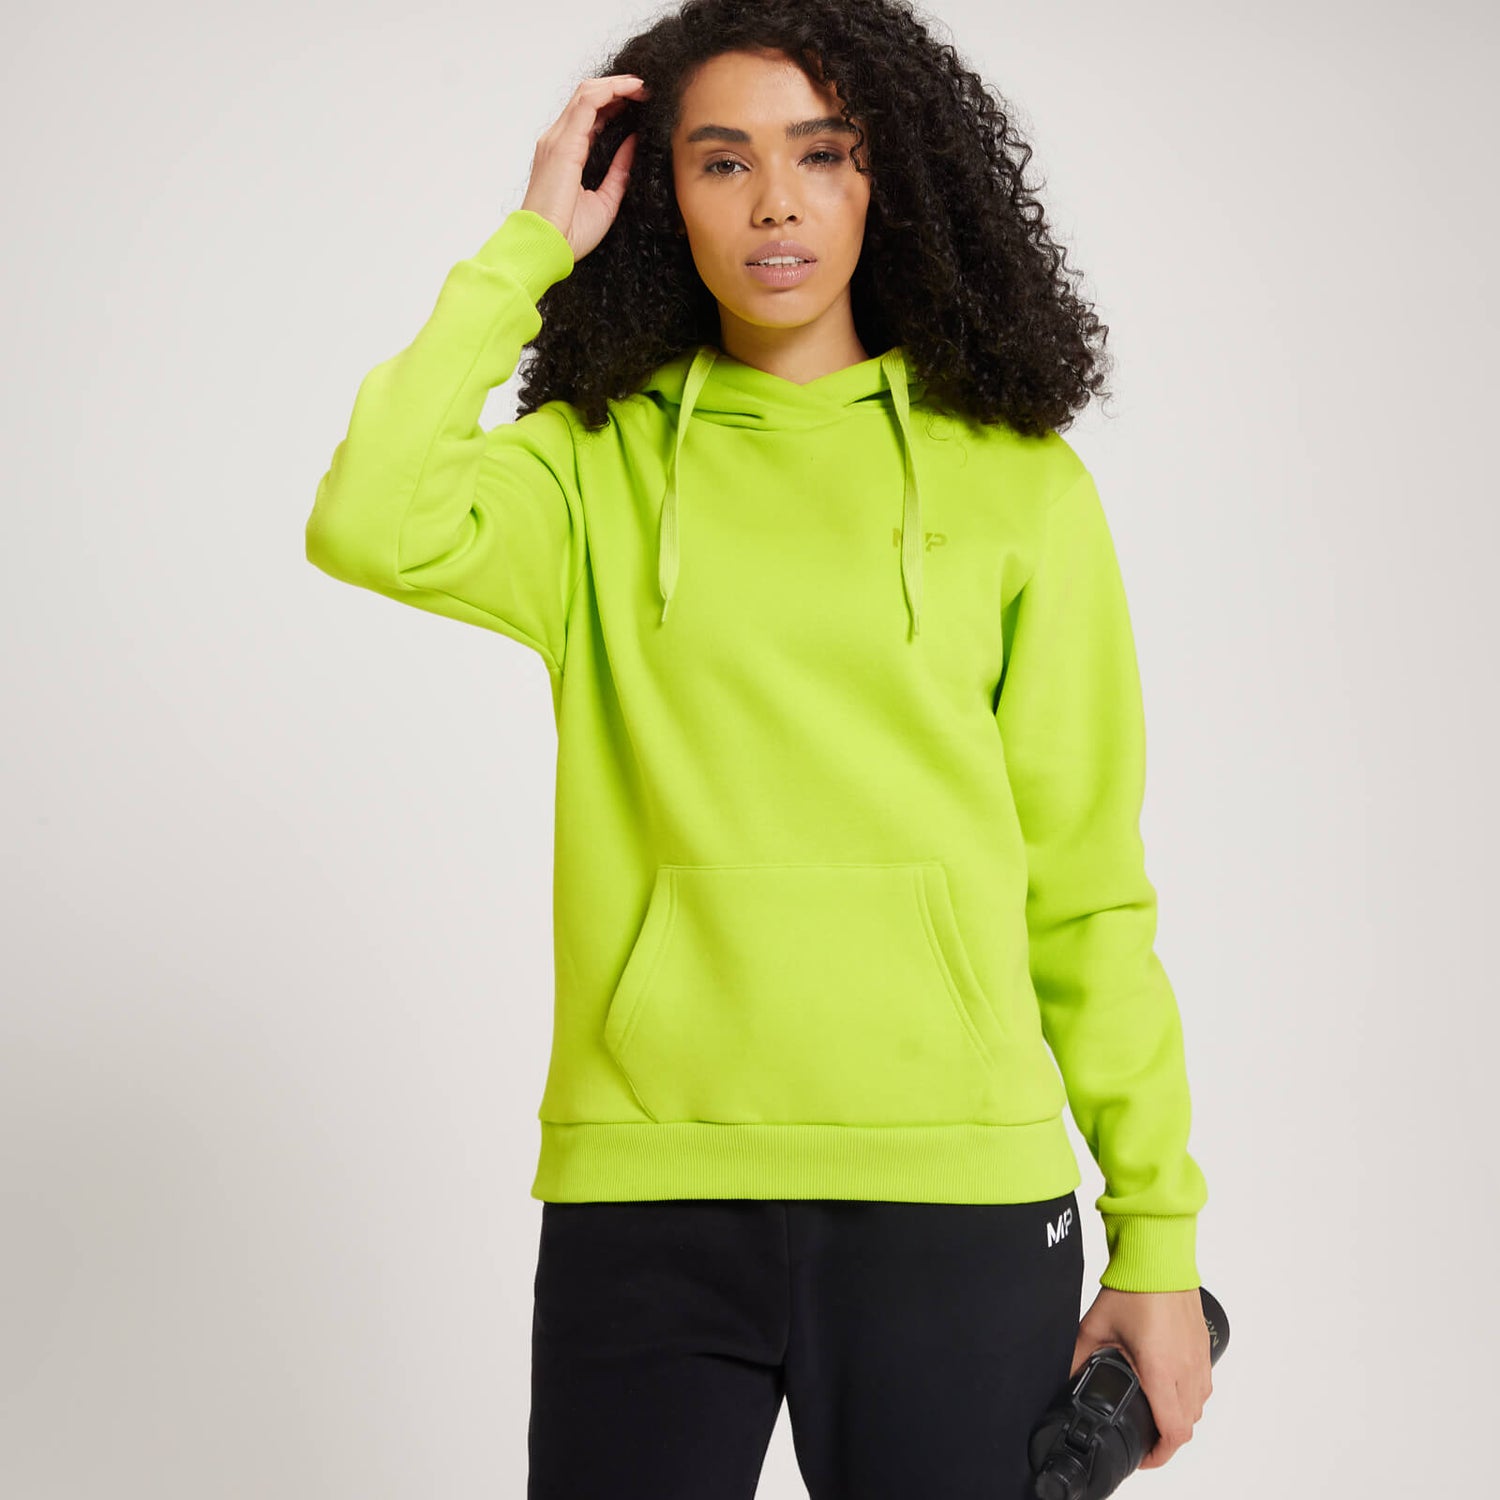 MP Women's Fade Graphic Hoodie - Lime - XXS